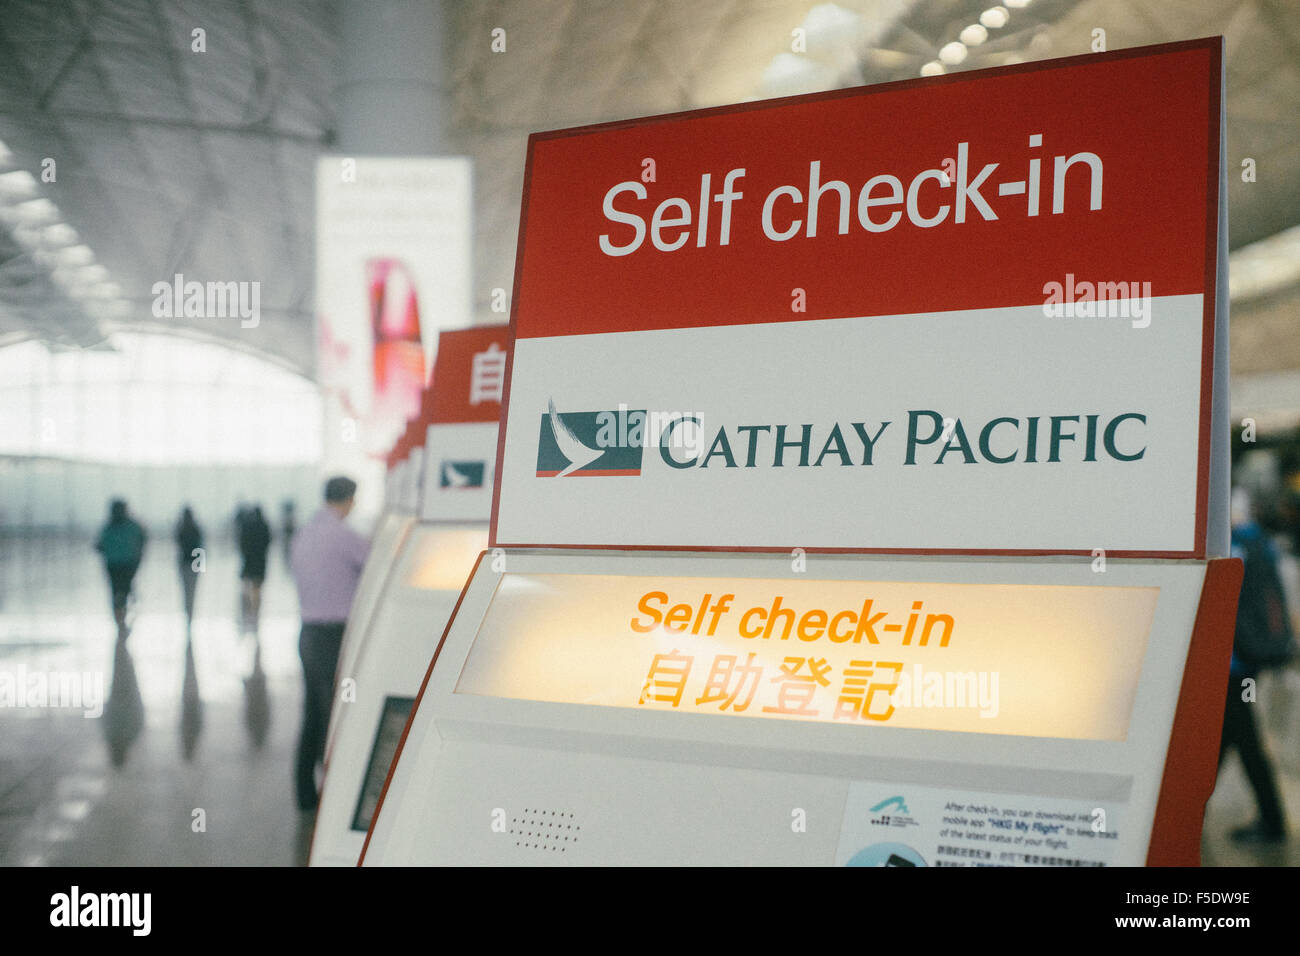 Cathay pacific self check in counter in hong kong airport. For quick  boarding pass check in. Stock Photo